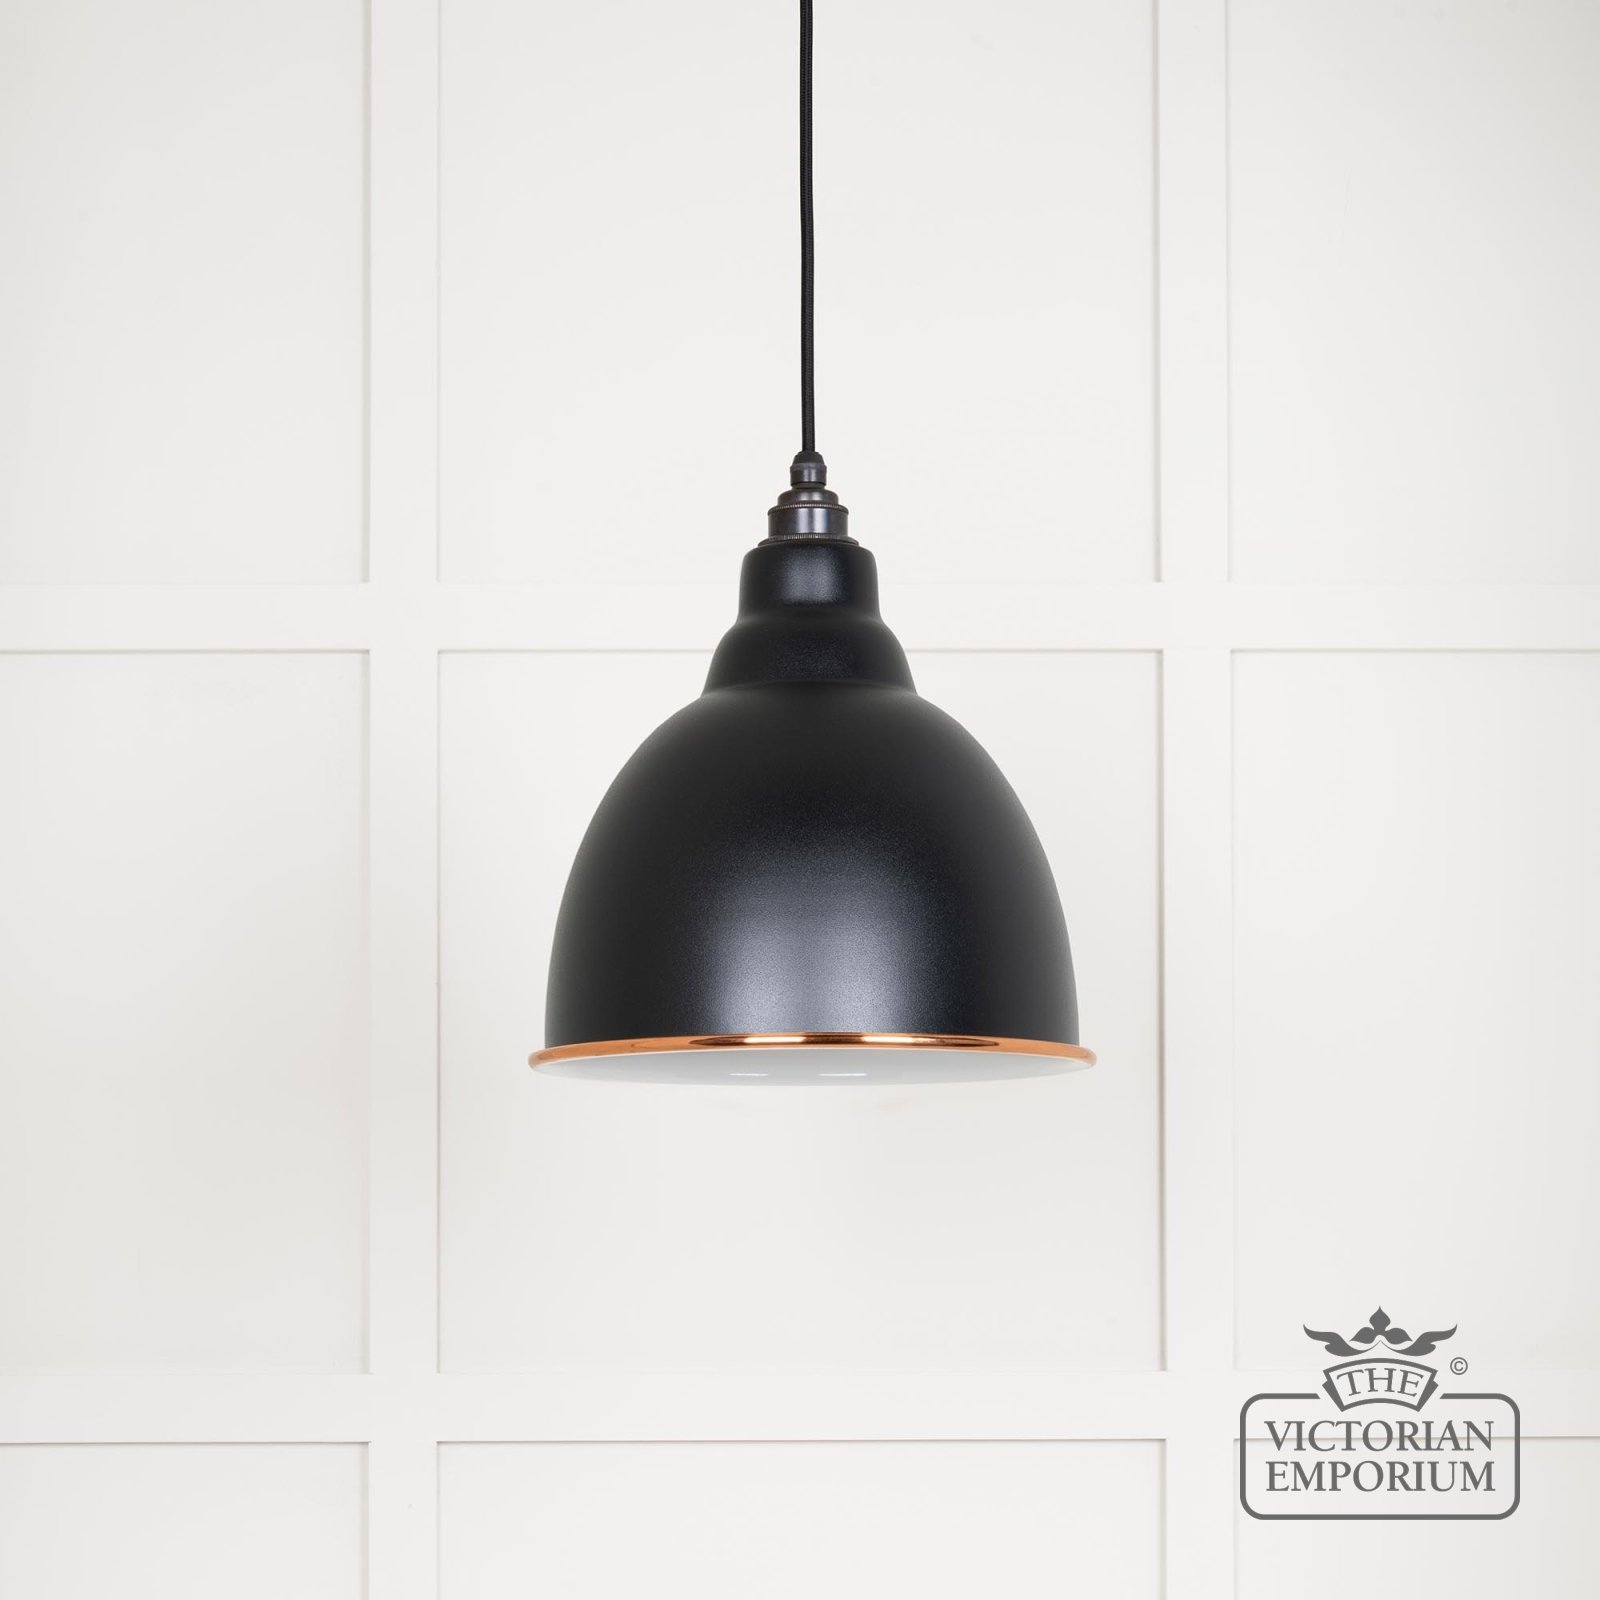 Brindle pendant light in Black with white gloss interior